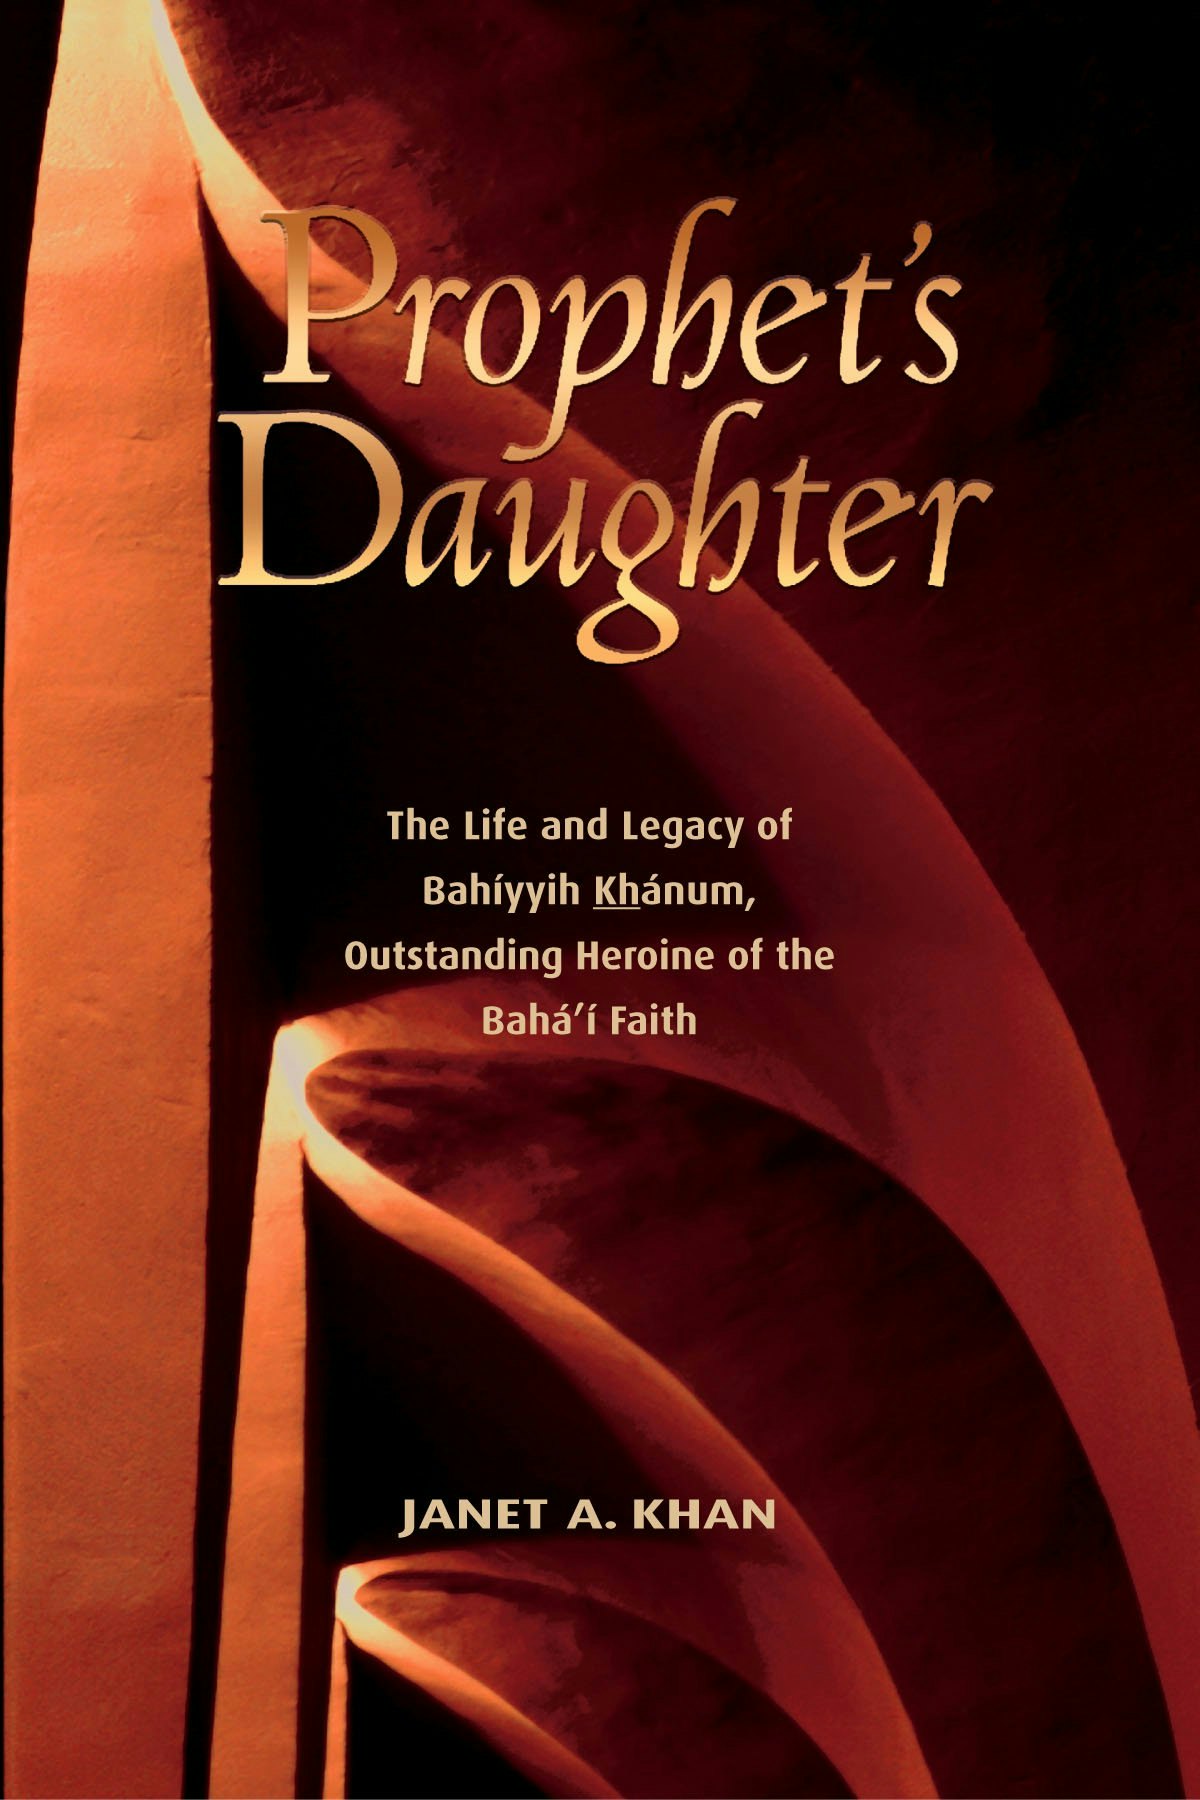 The cover of "Prophet's Daughter."